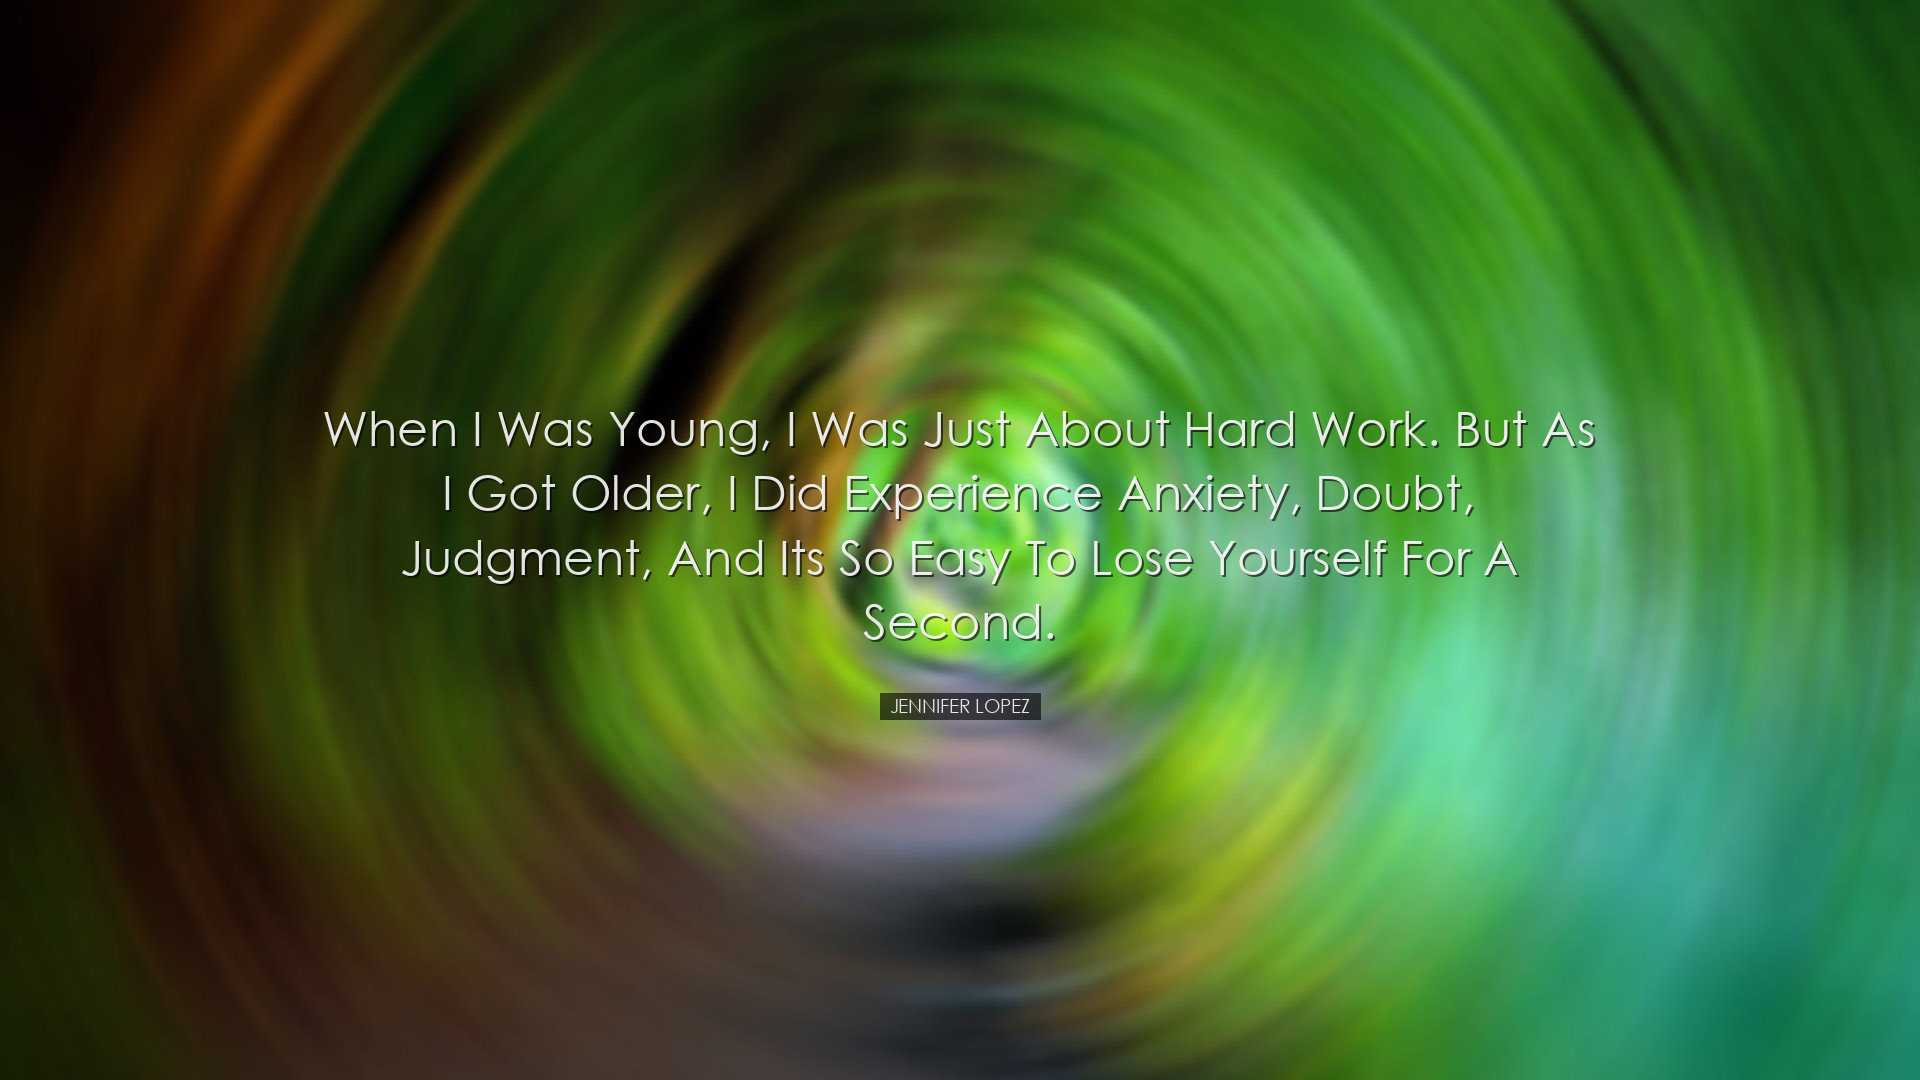 When I was young, I was just about hard work. But as I got older,